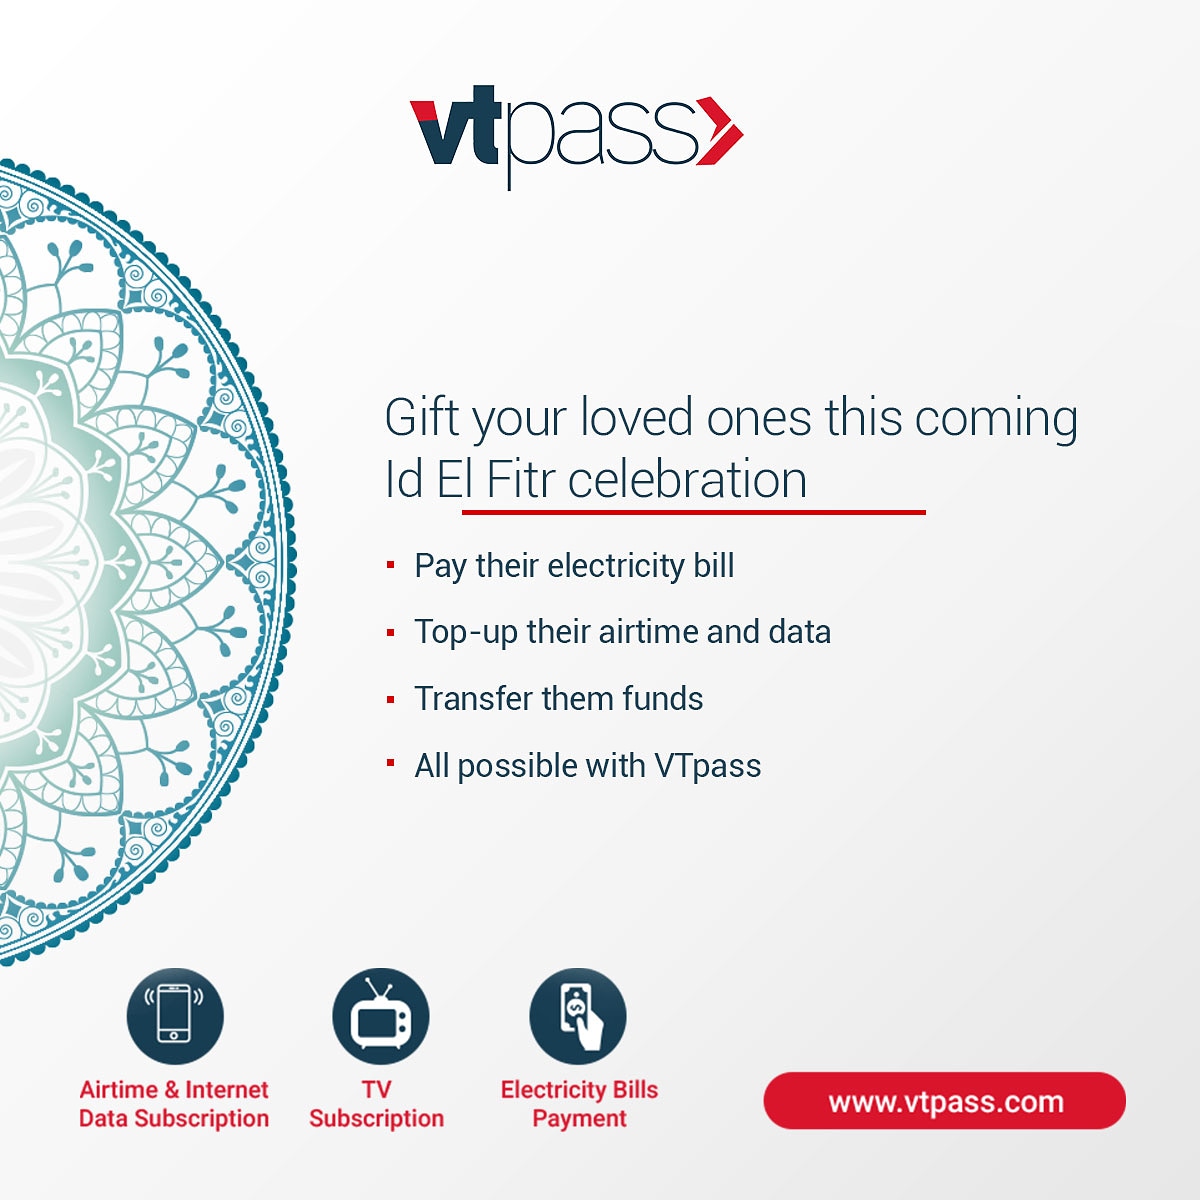 Few days to the Id El Fitr celebration🎉. How would you gift your loved ones? 🤔 Pick from the option below👇
#vtpass #onlinepayment #tvsubscription #electricitypament #gotvsubscription #dstvsubscription #StarTimes #airtimerecharge #banktransfers #likeforlikes #followforfollow